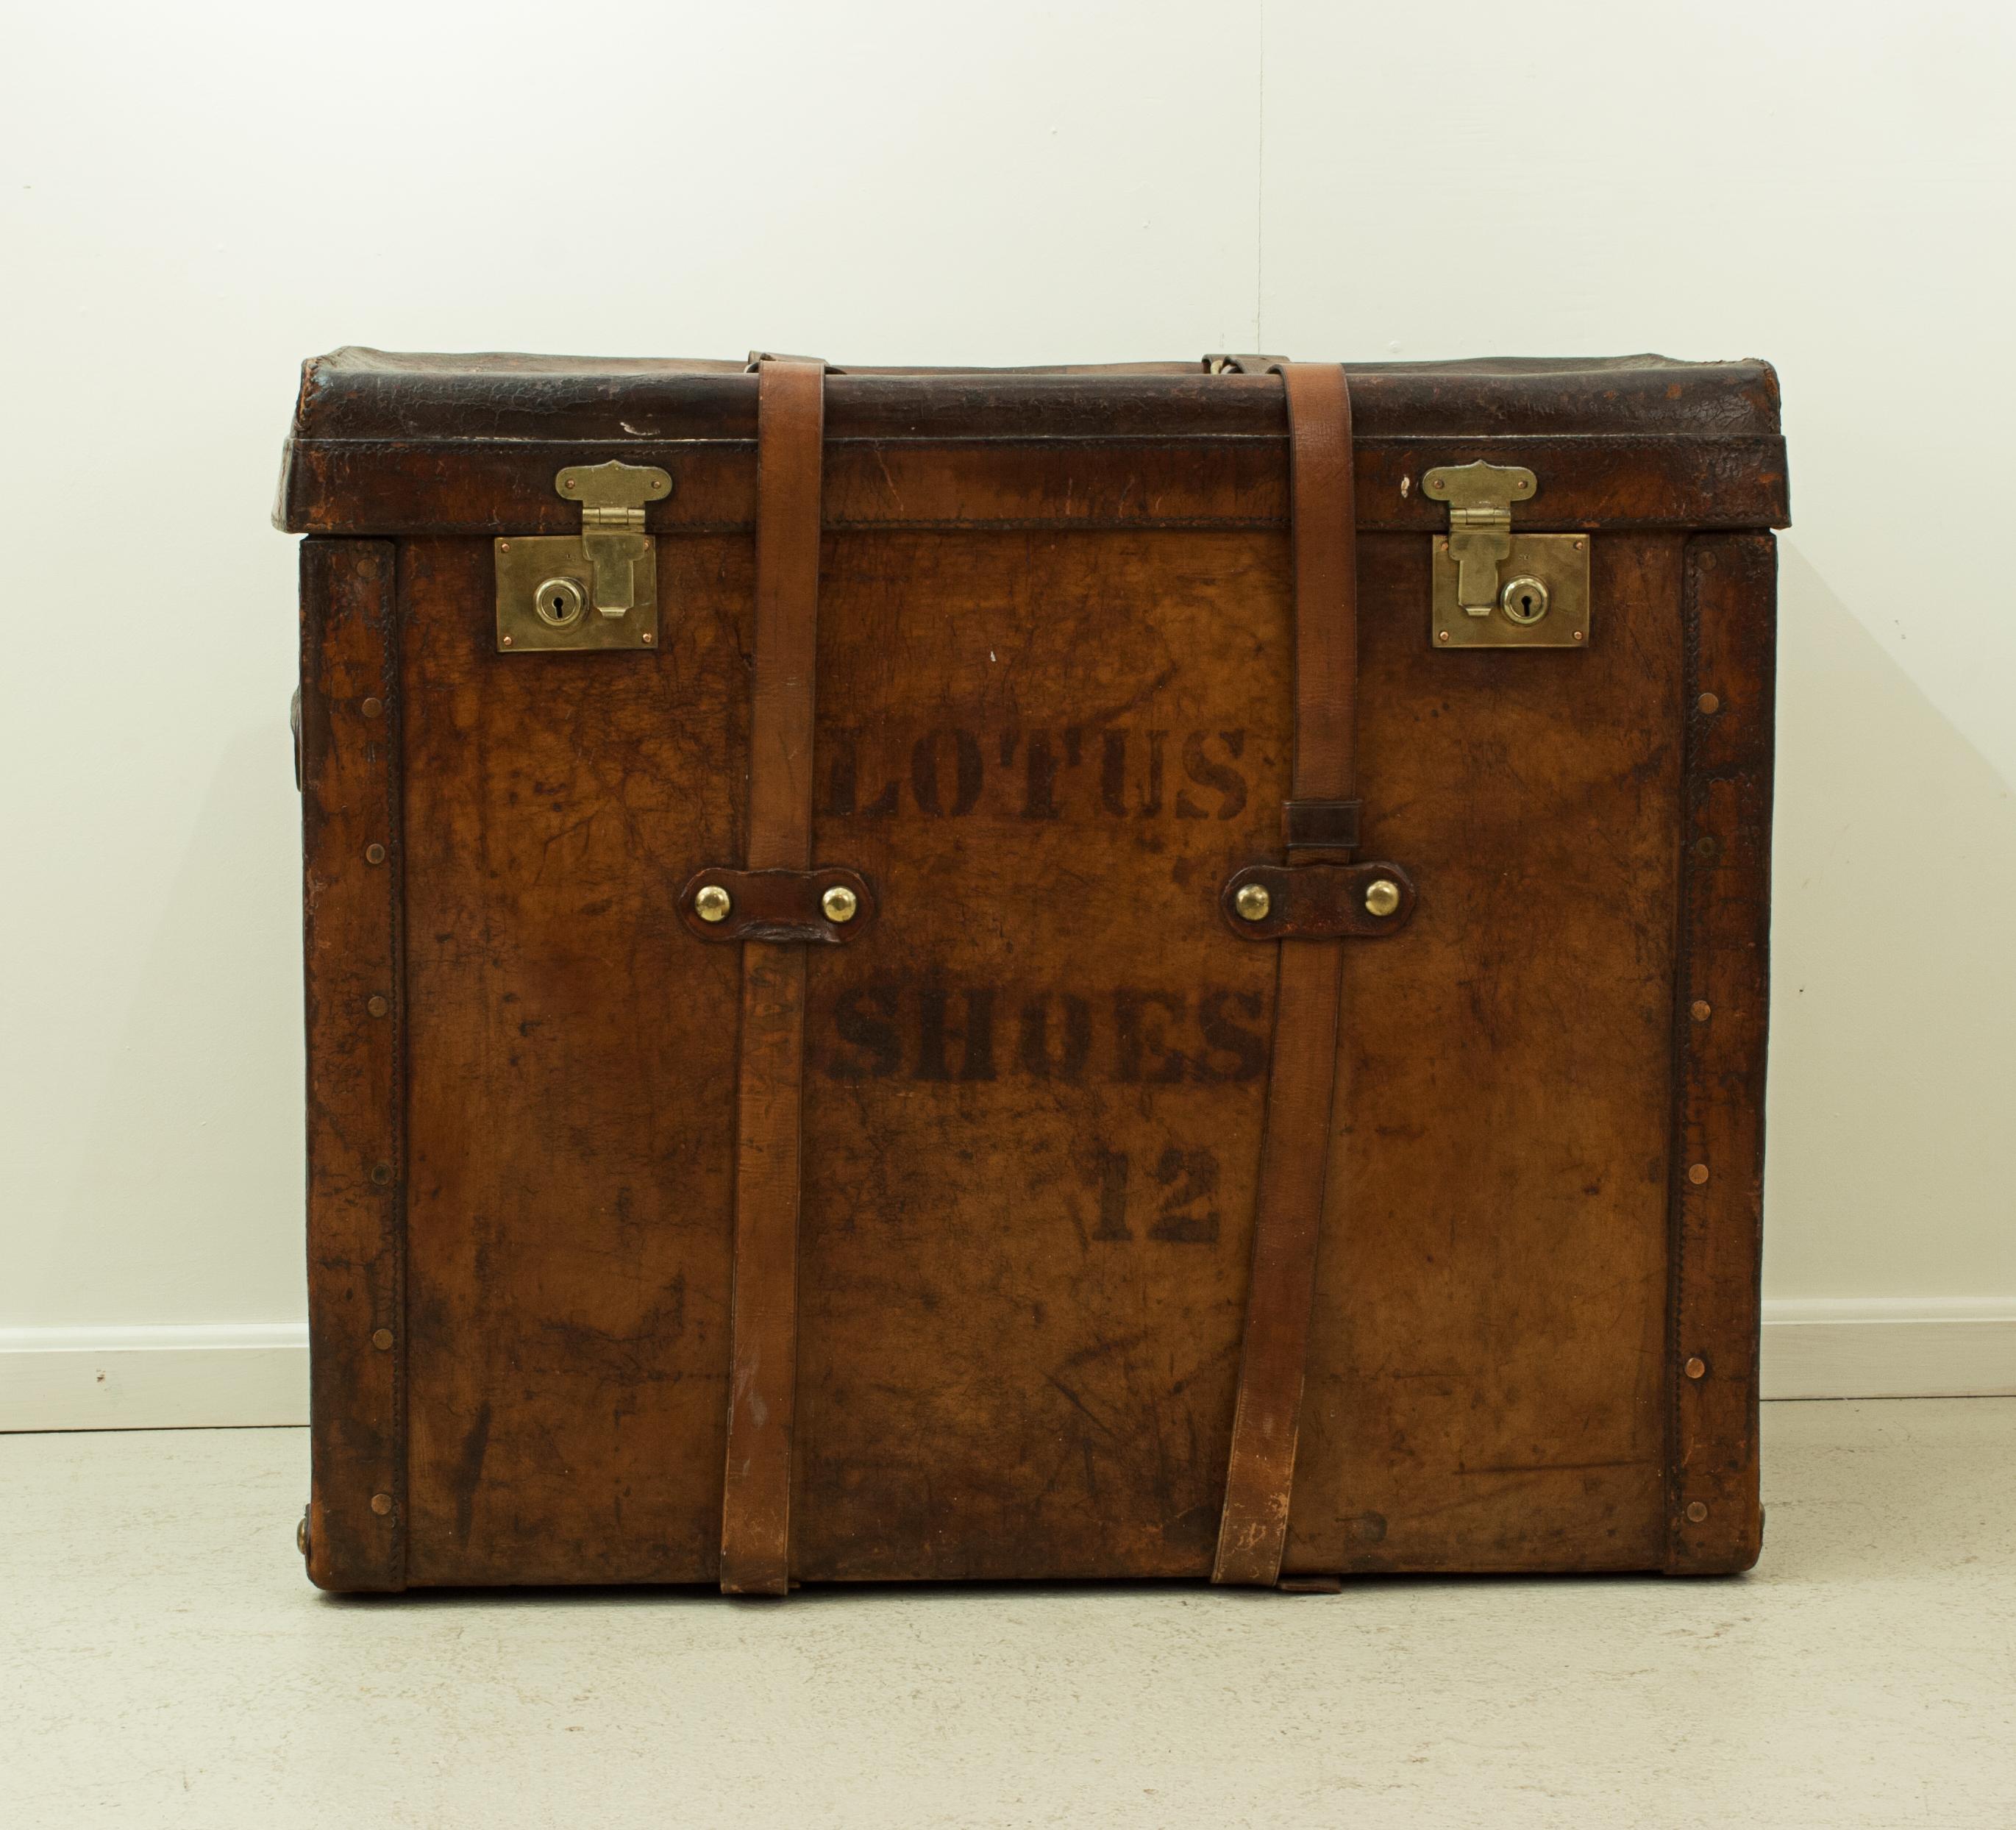 Large leather traveling trunk
An unusual leather trunk for the storage of shoes, painted to the front and back 'Lotus Shoes 12'. The case with two leather carry handles, one either end, brass locks and two leather straps. The strap stamped 'D.